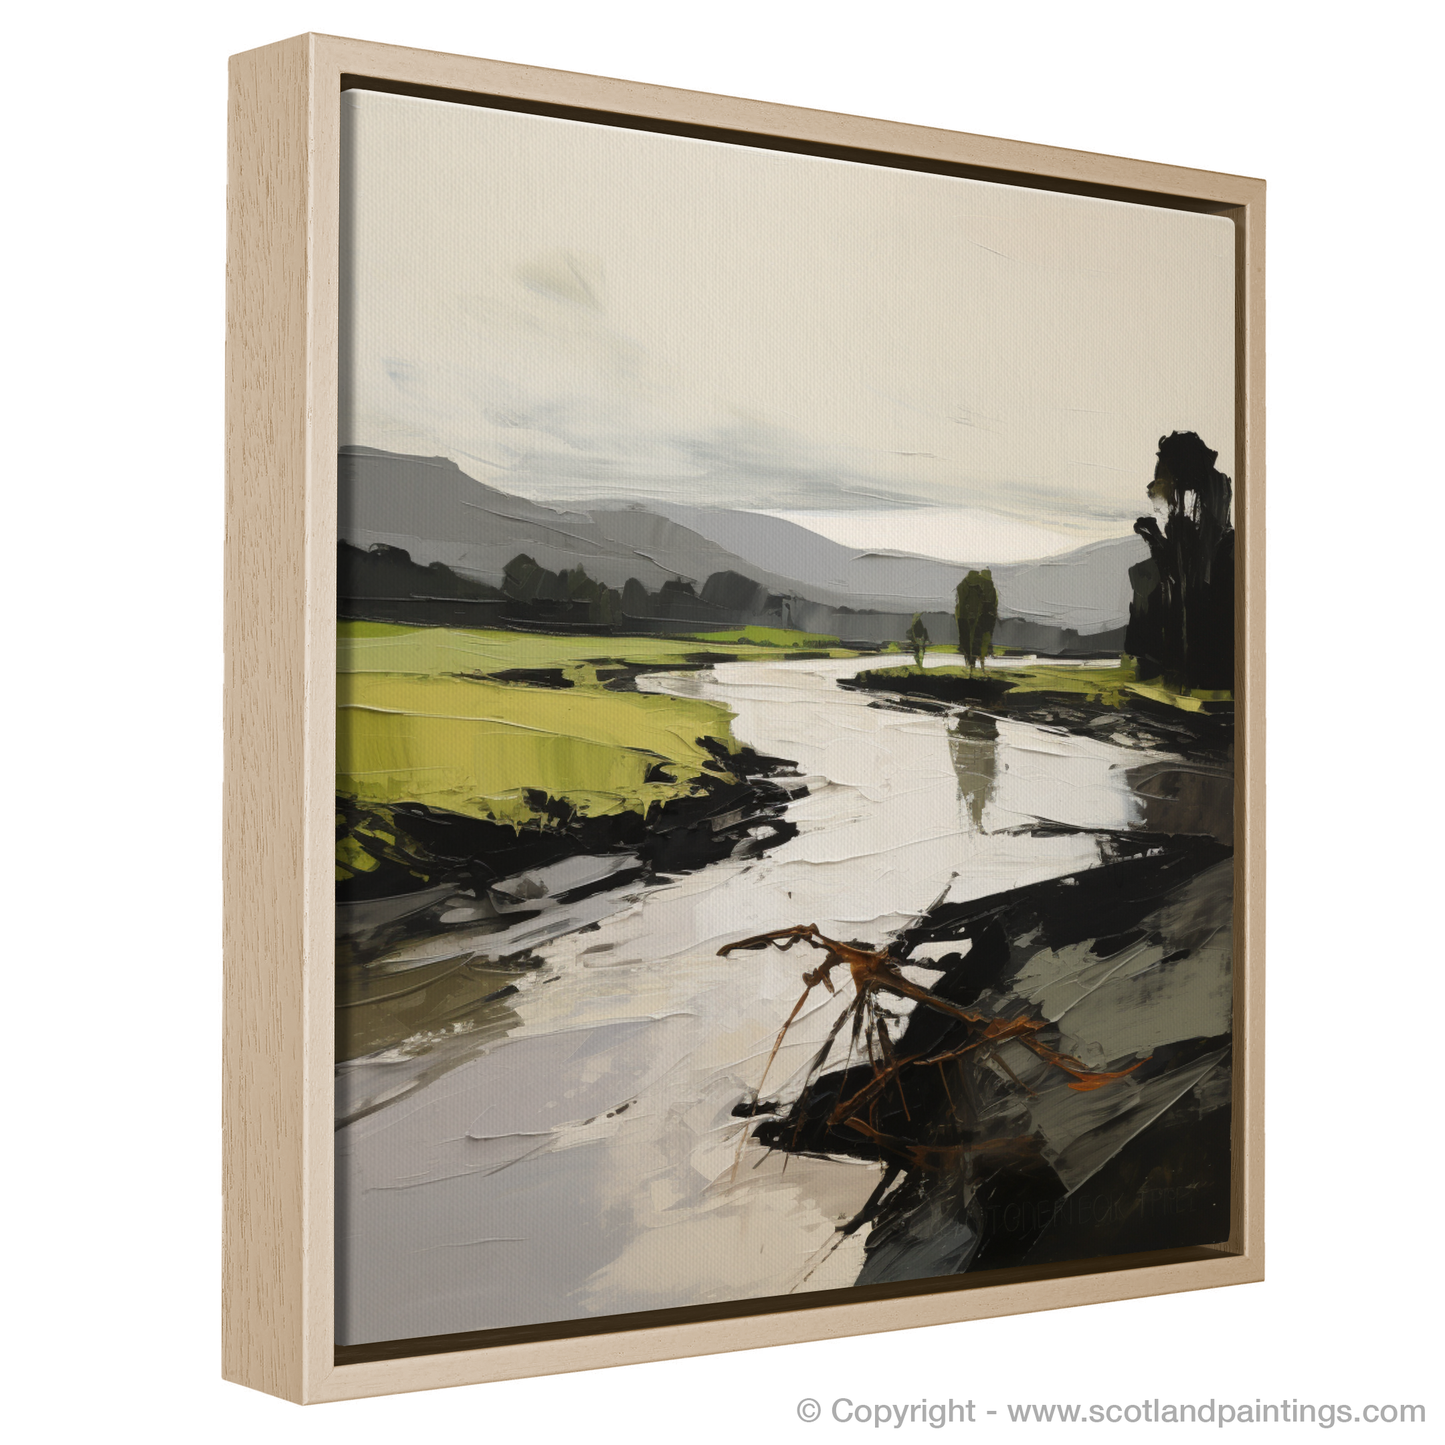 Painting and Art Print of River Leven, West Dunbartonshire entitled "Dynamic Spirit of River Leven: An Expressionist Ode to Scottish Landscape".